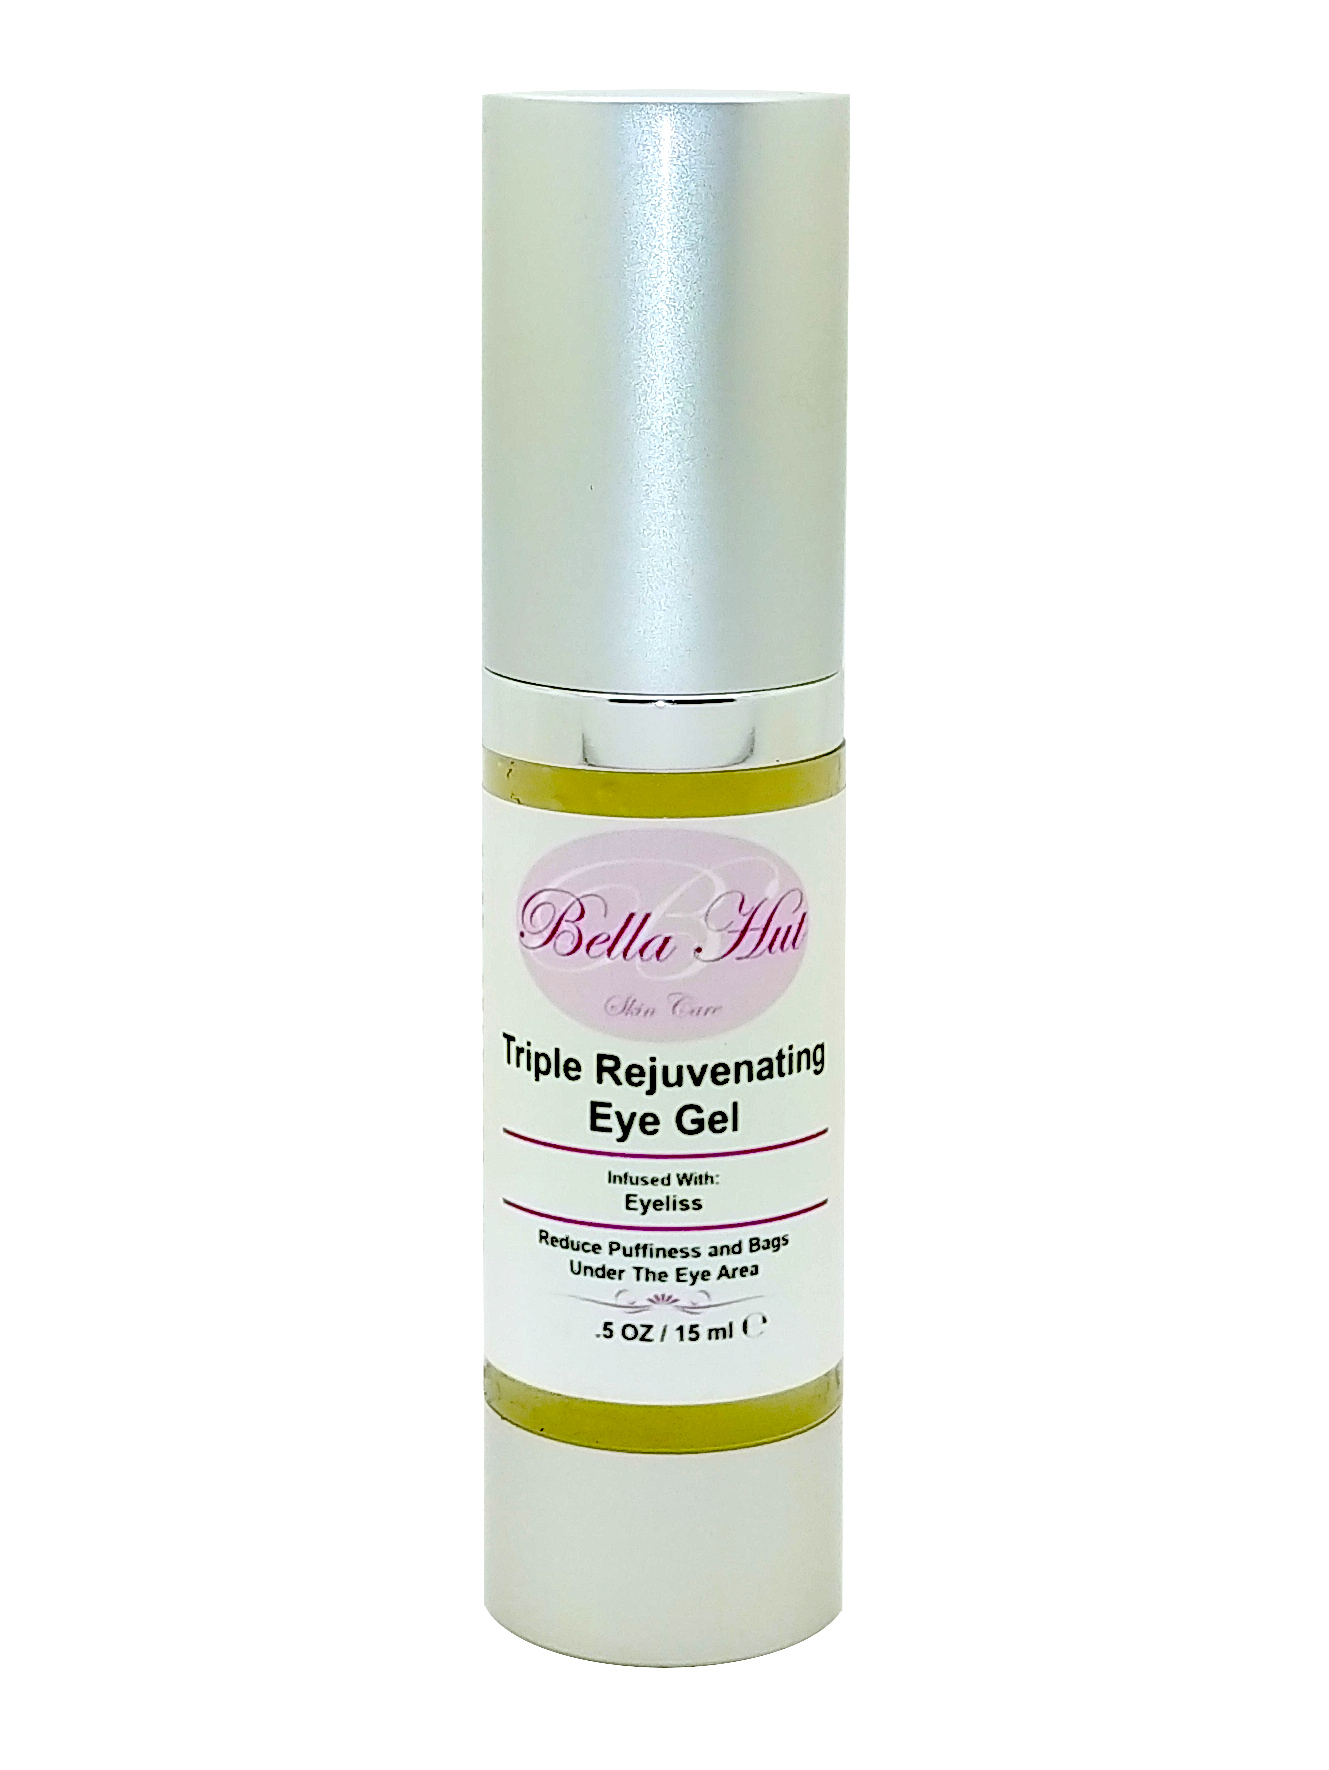 Triple Rejuvenating Eye Gel with Eyeliss for treating under eye bags and puffiness under eyes